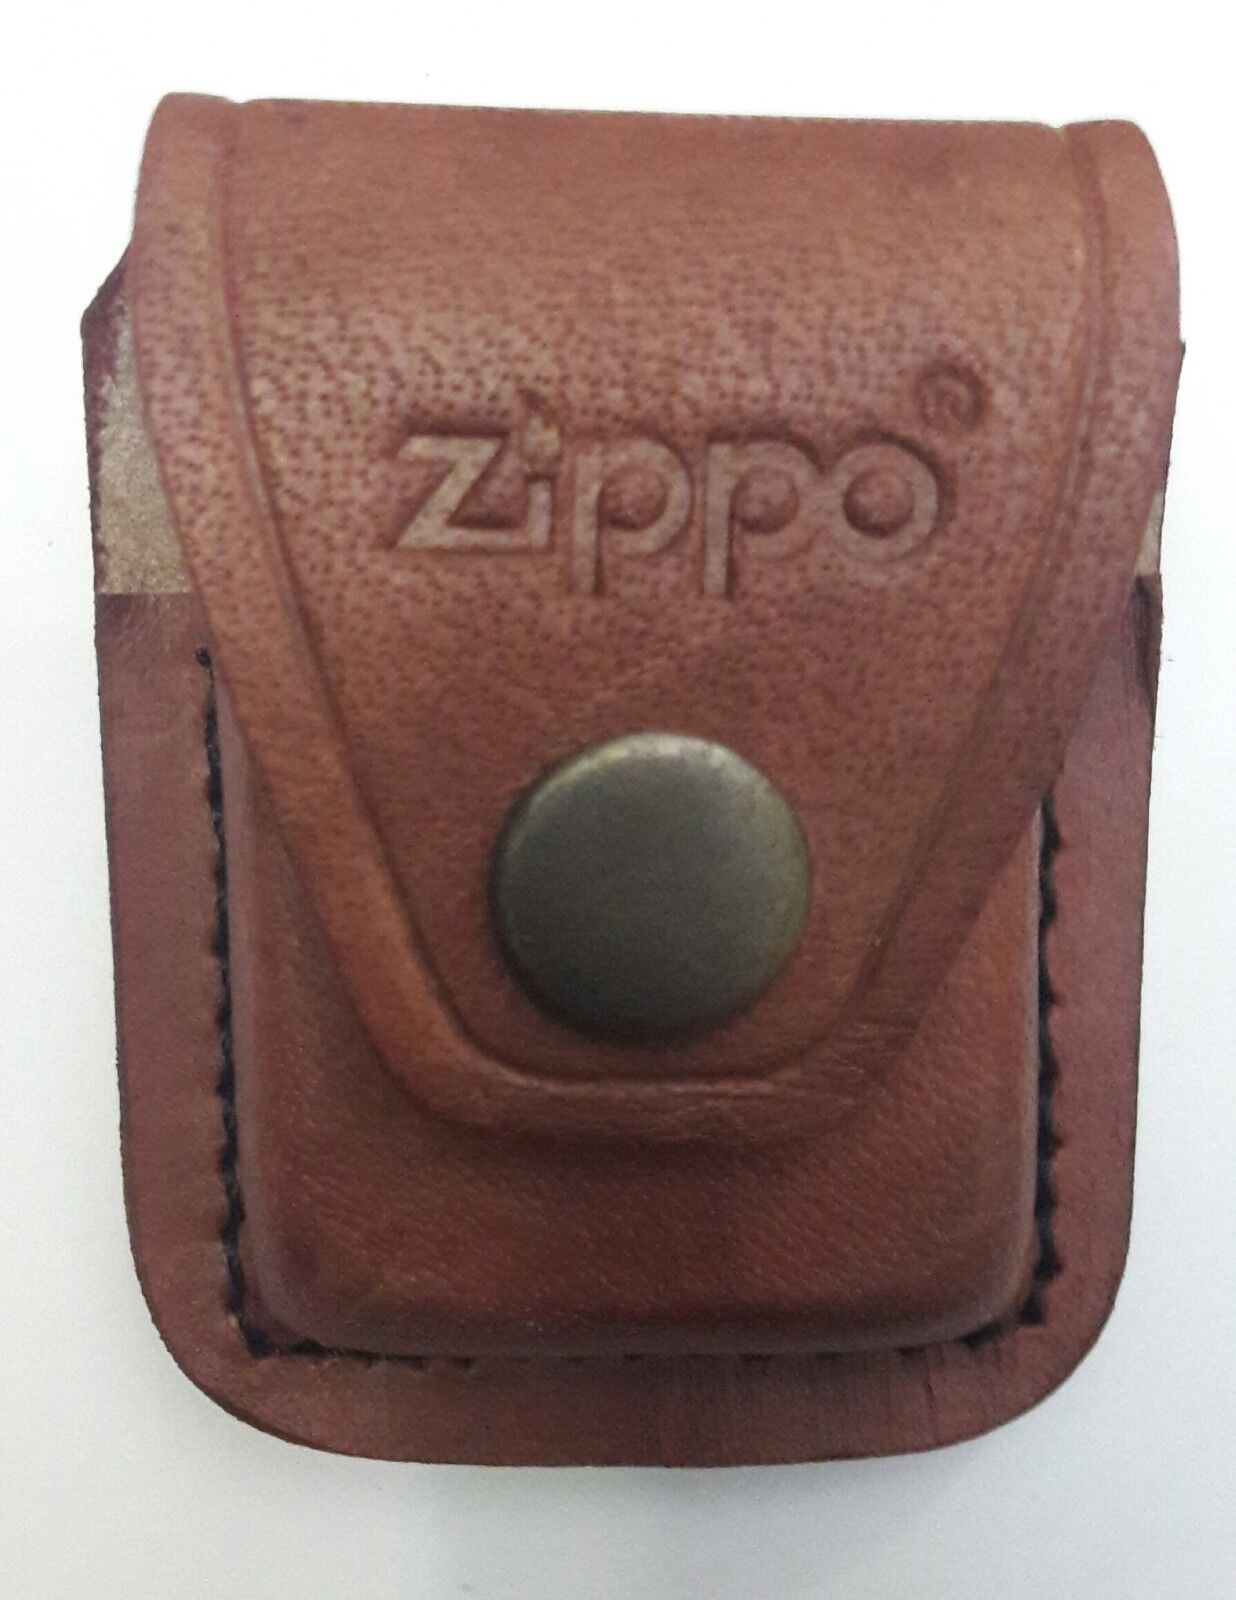 Zippo Lighter Leather Case Pouch Holder Cover With Loop New In Different Color